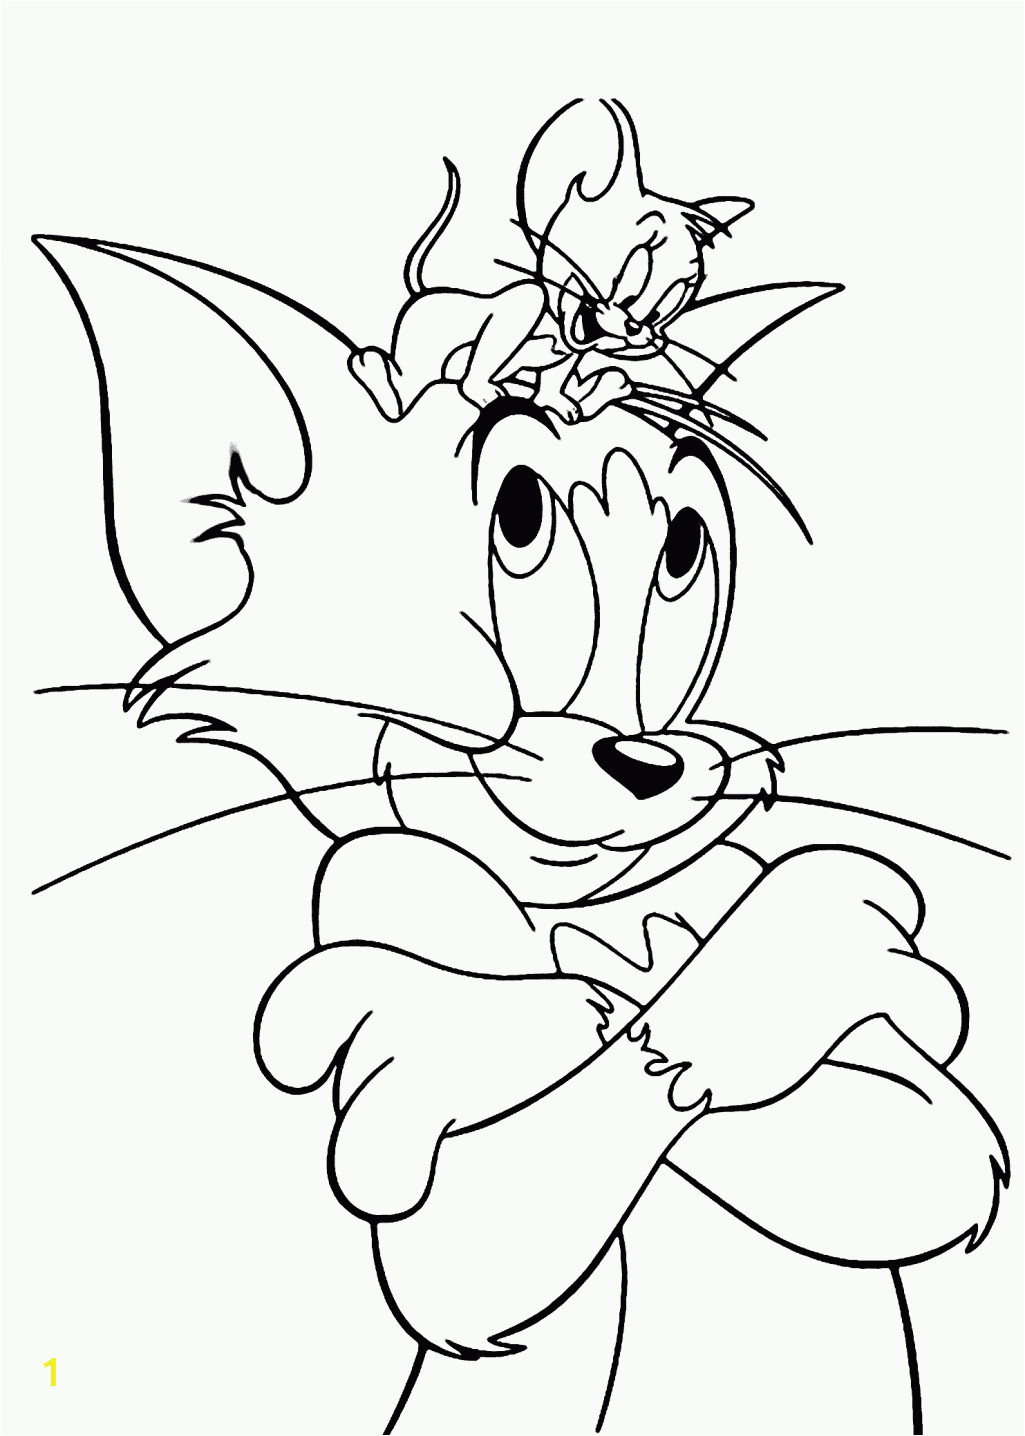 jerry coloring page